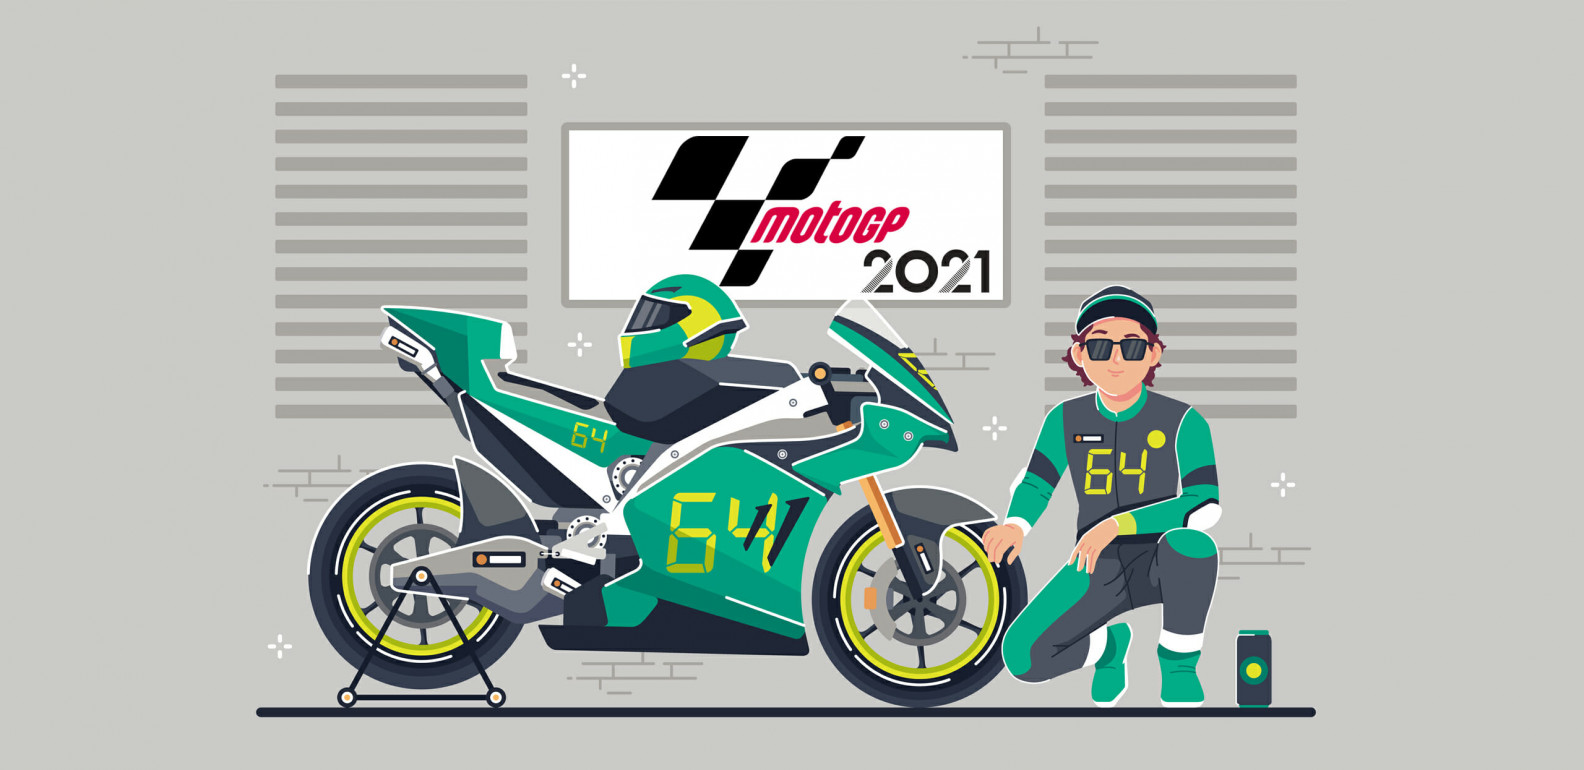 How to watch MotoGP 2021 for free in India